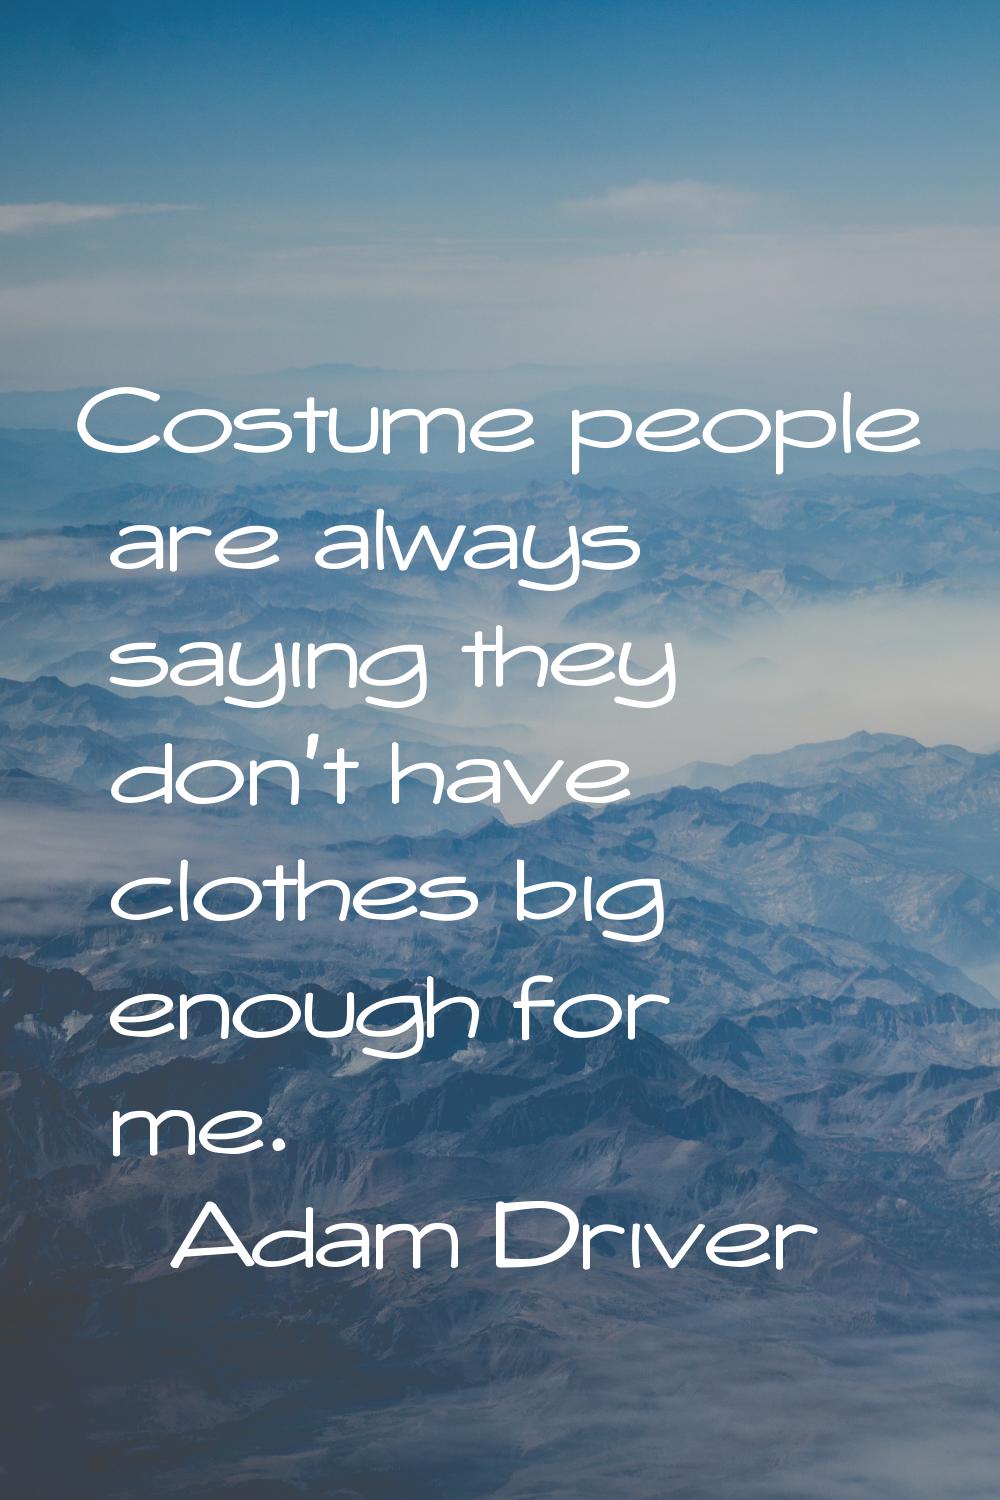 Costume people are always saying they don't have clothes big enough for me.